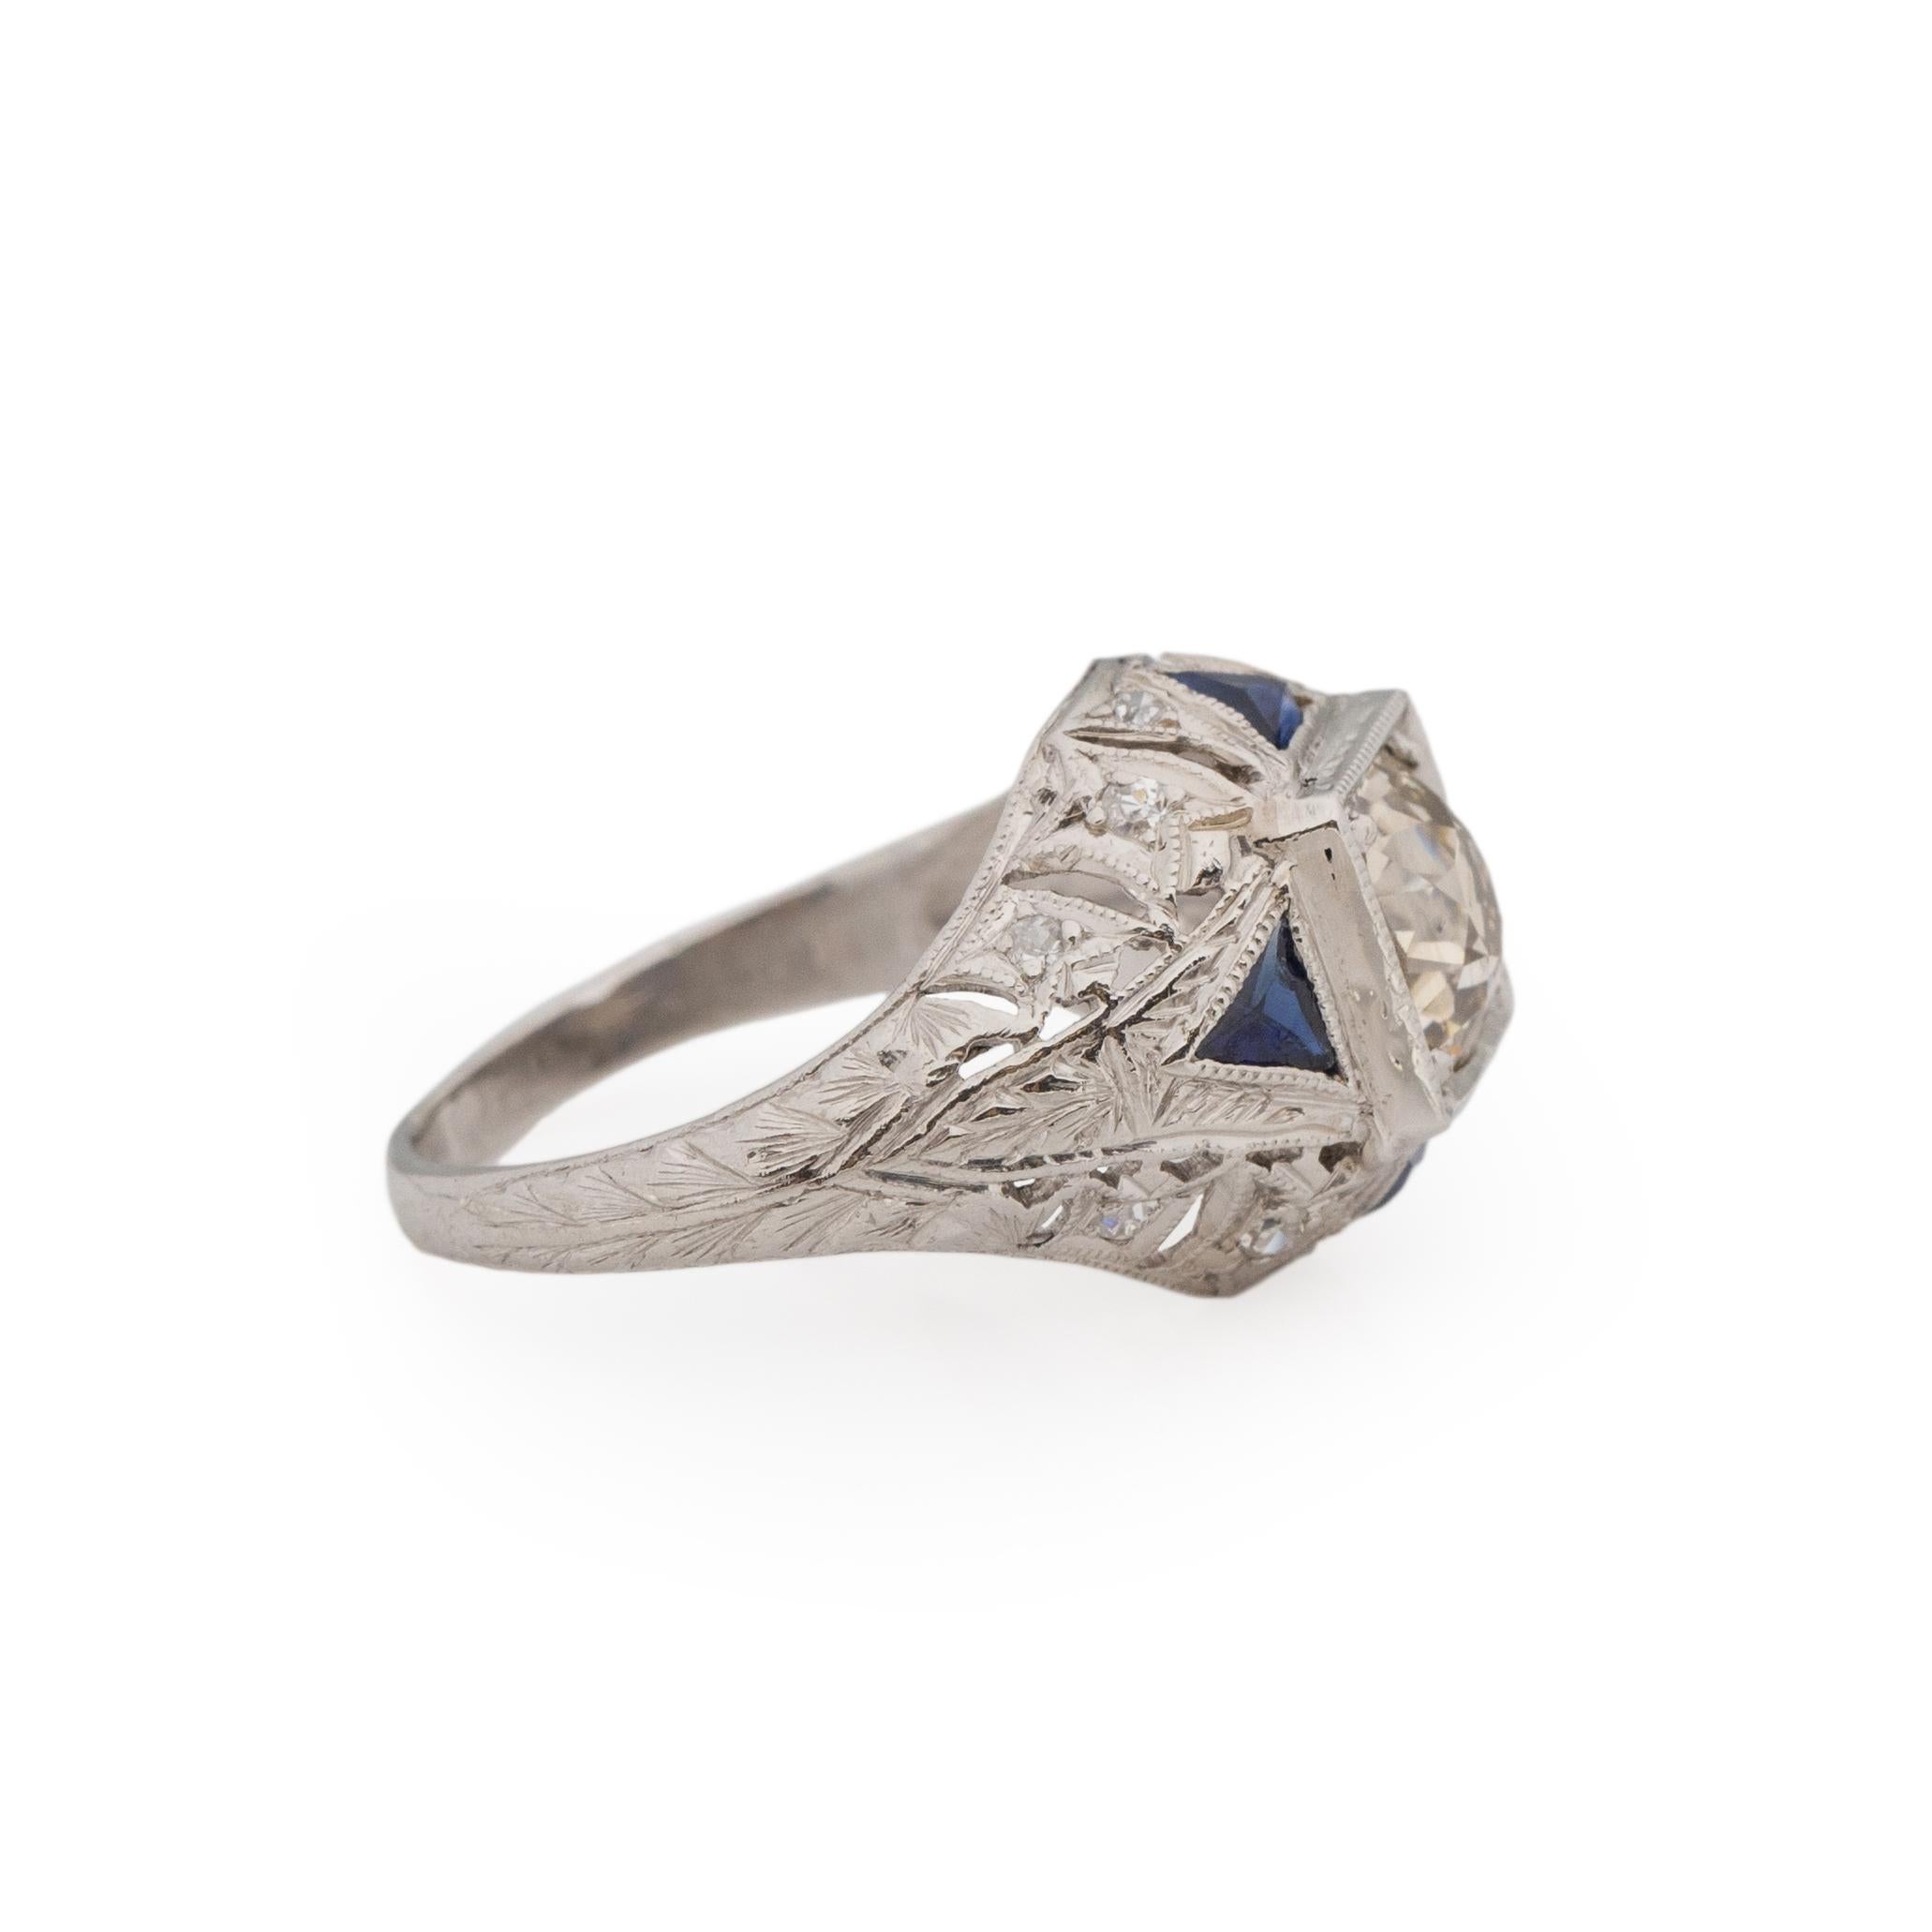 This art deco piece would be perfect for men or woman, engagement ring, offhand ring or just because! Crafted in platinum this stunner has a wider band that showcases delicate floral engraving and bold carved open work. Giving the overall ring a eye